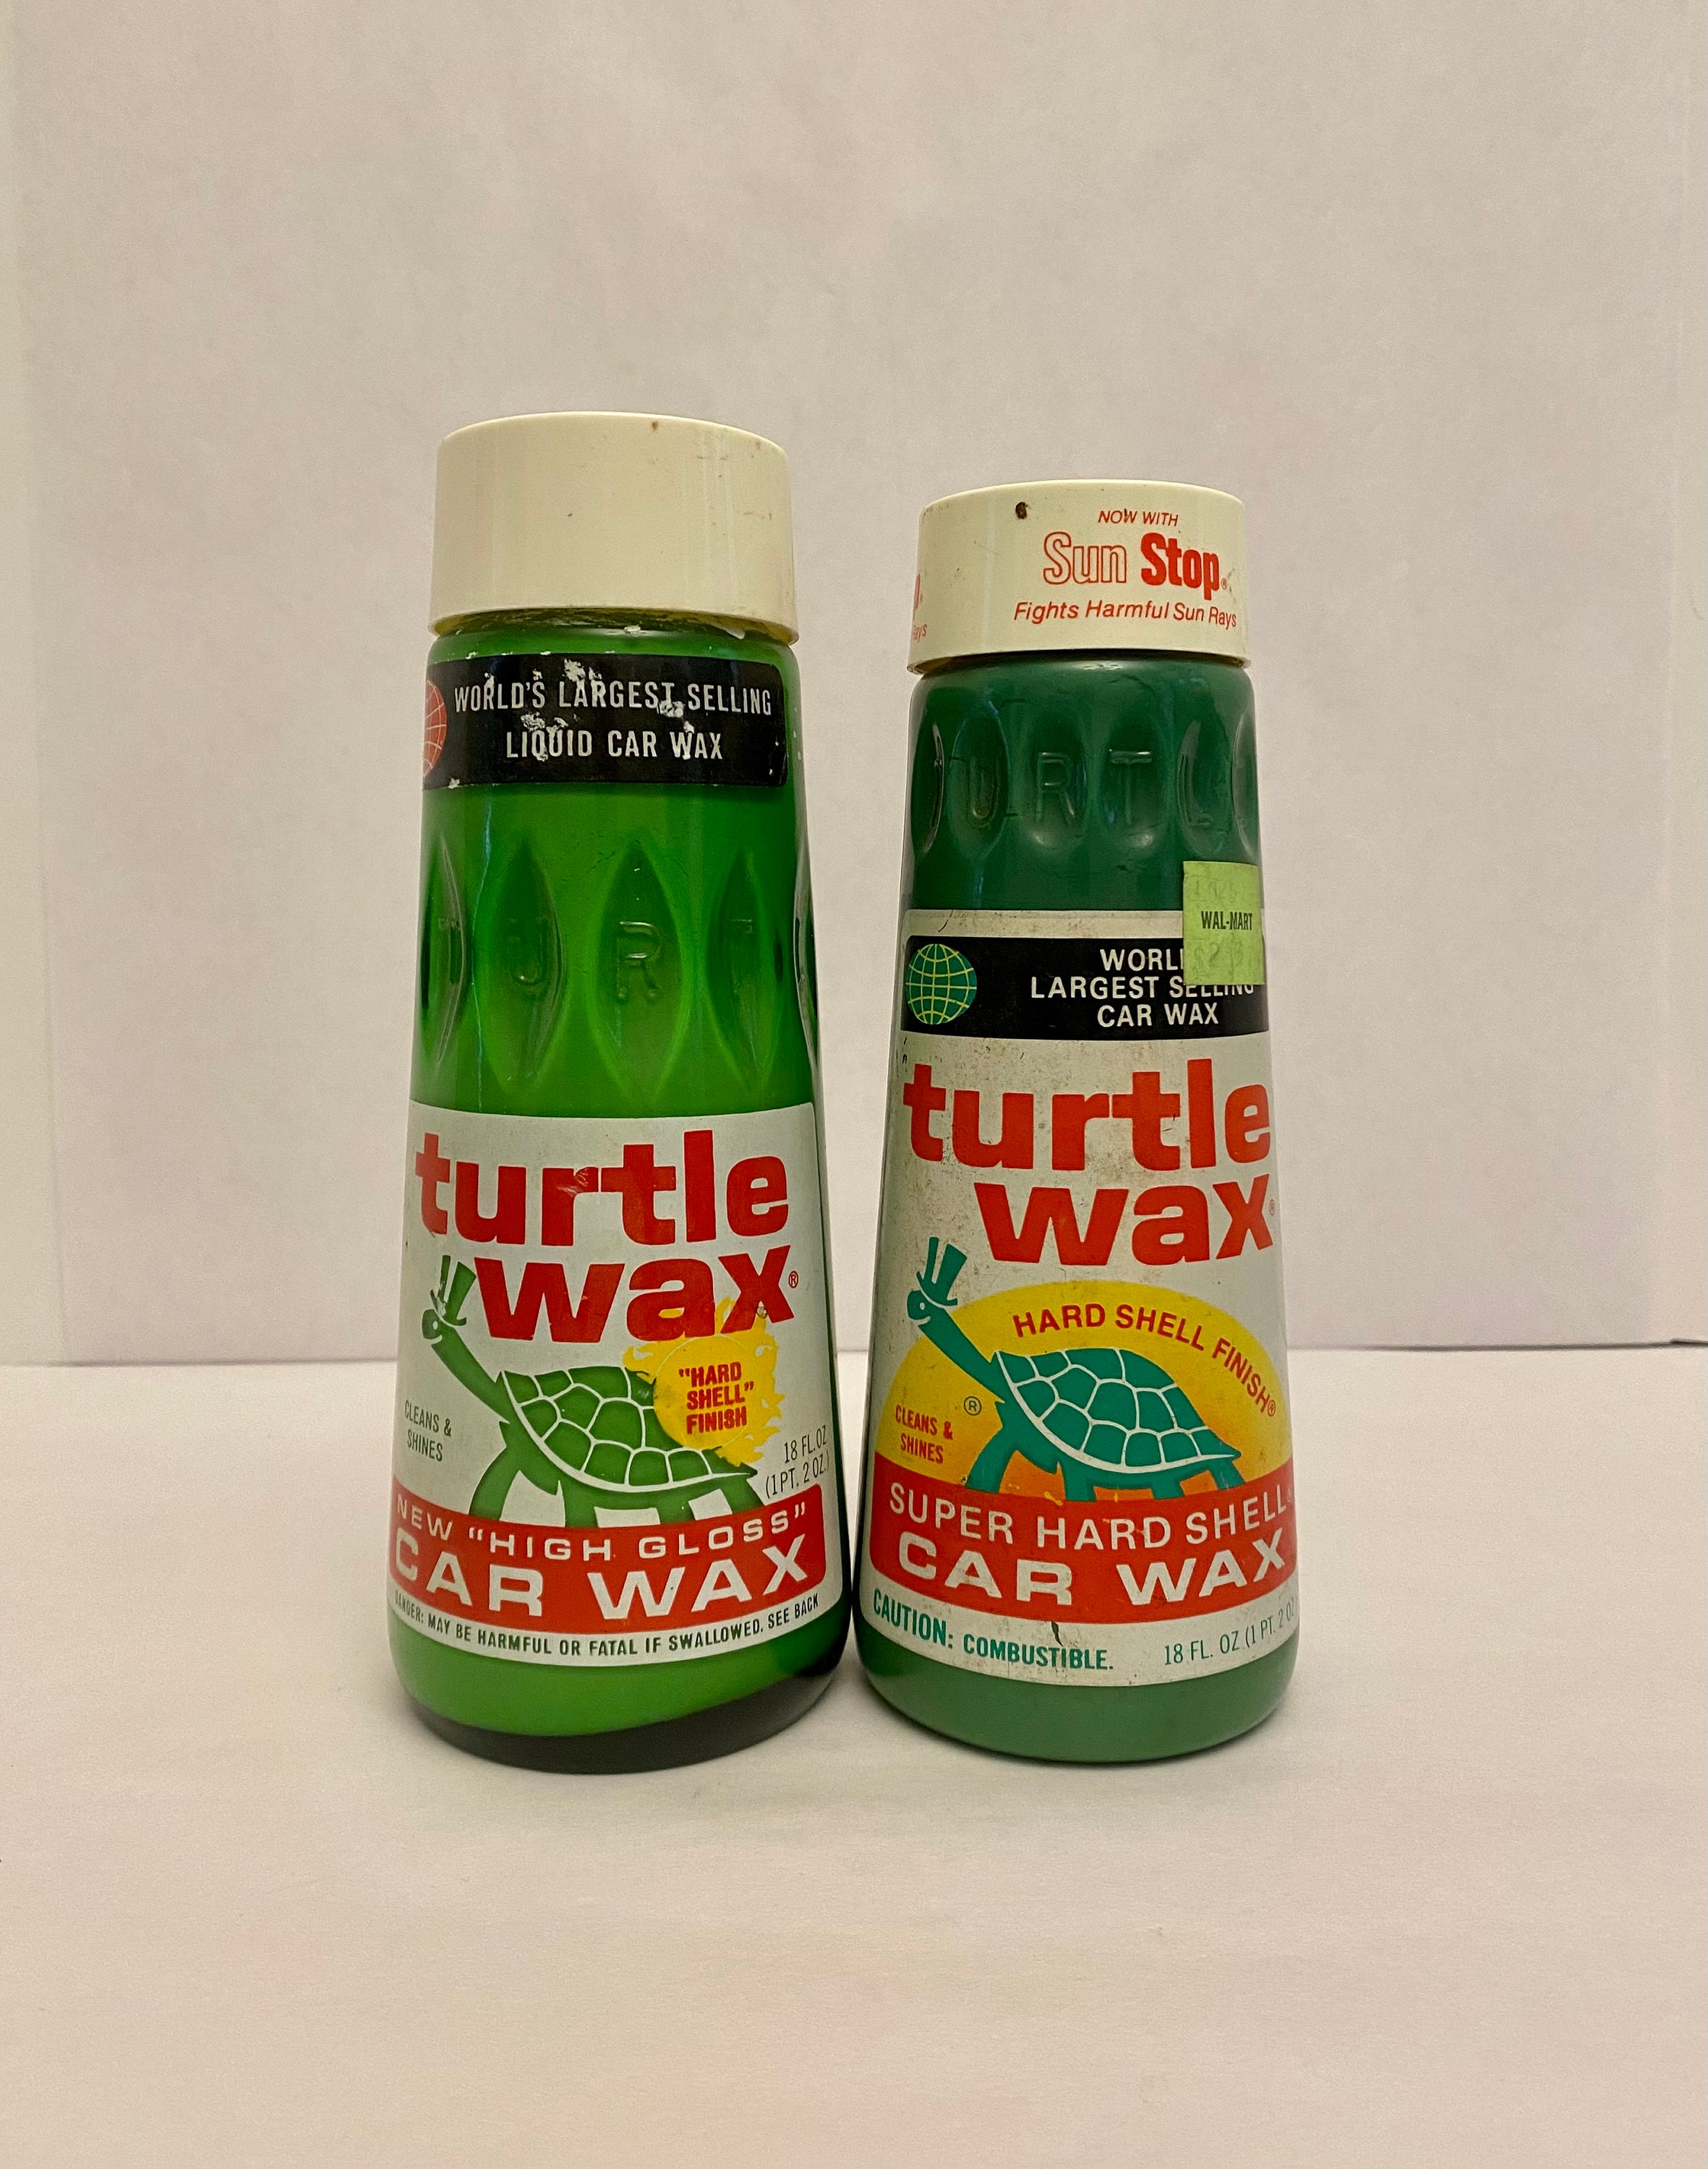 Vintage Turtle Wax Rubbing Compound Vintage Can of Heavy Duty Cleaner for  Cleaning Cars Nice Graphics Yellow Car 1970's Net Wt 10ox. 284gr 